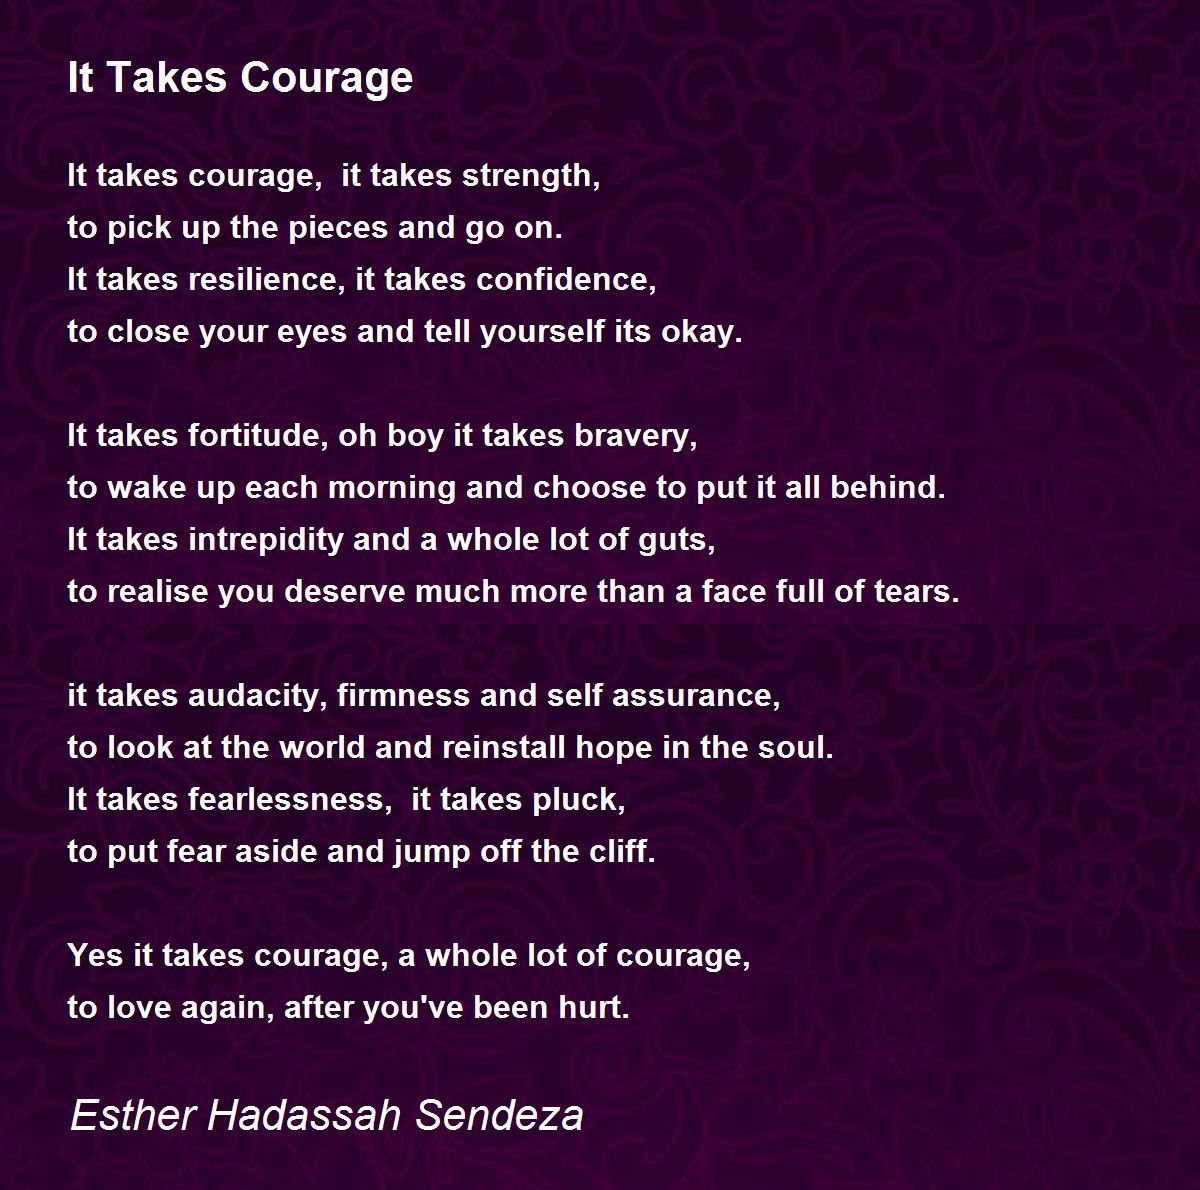 essay titles about courage